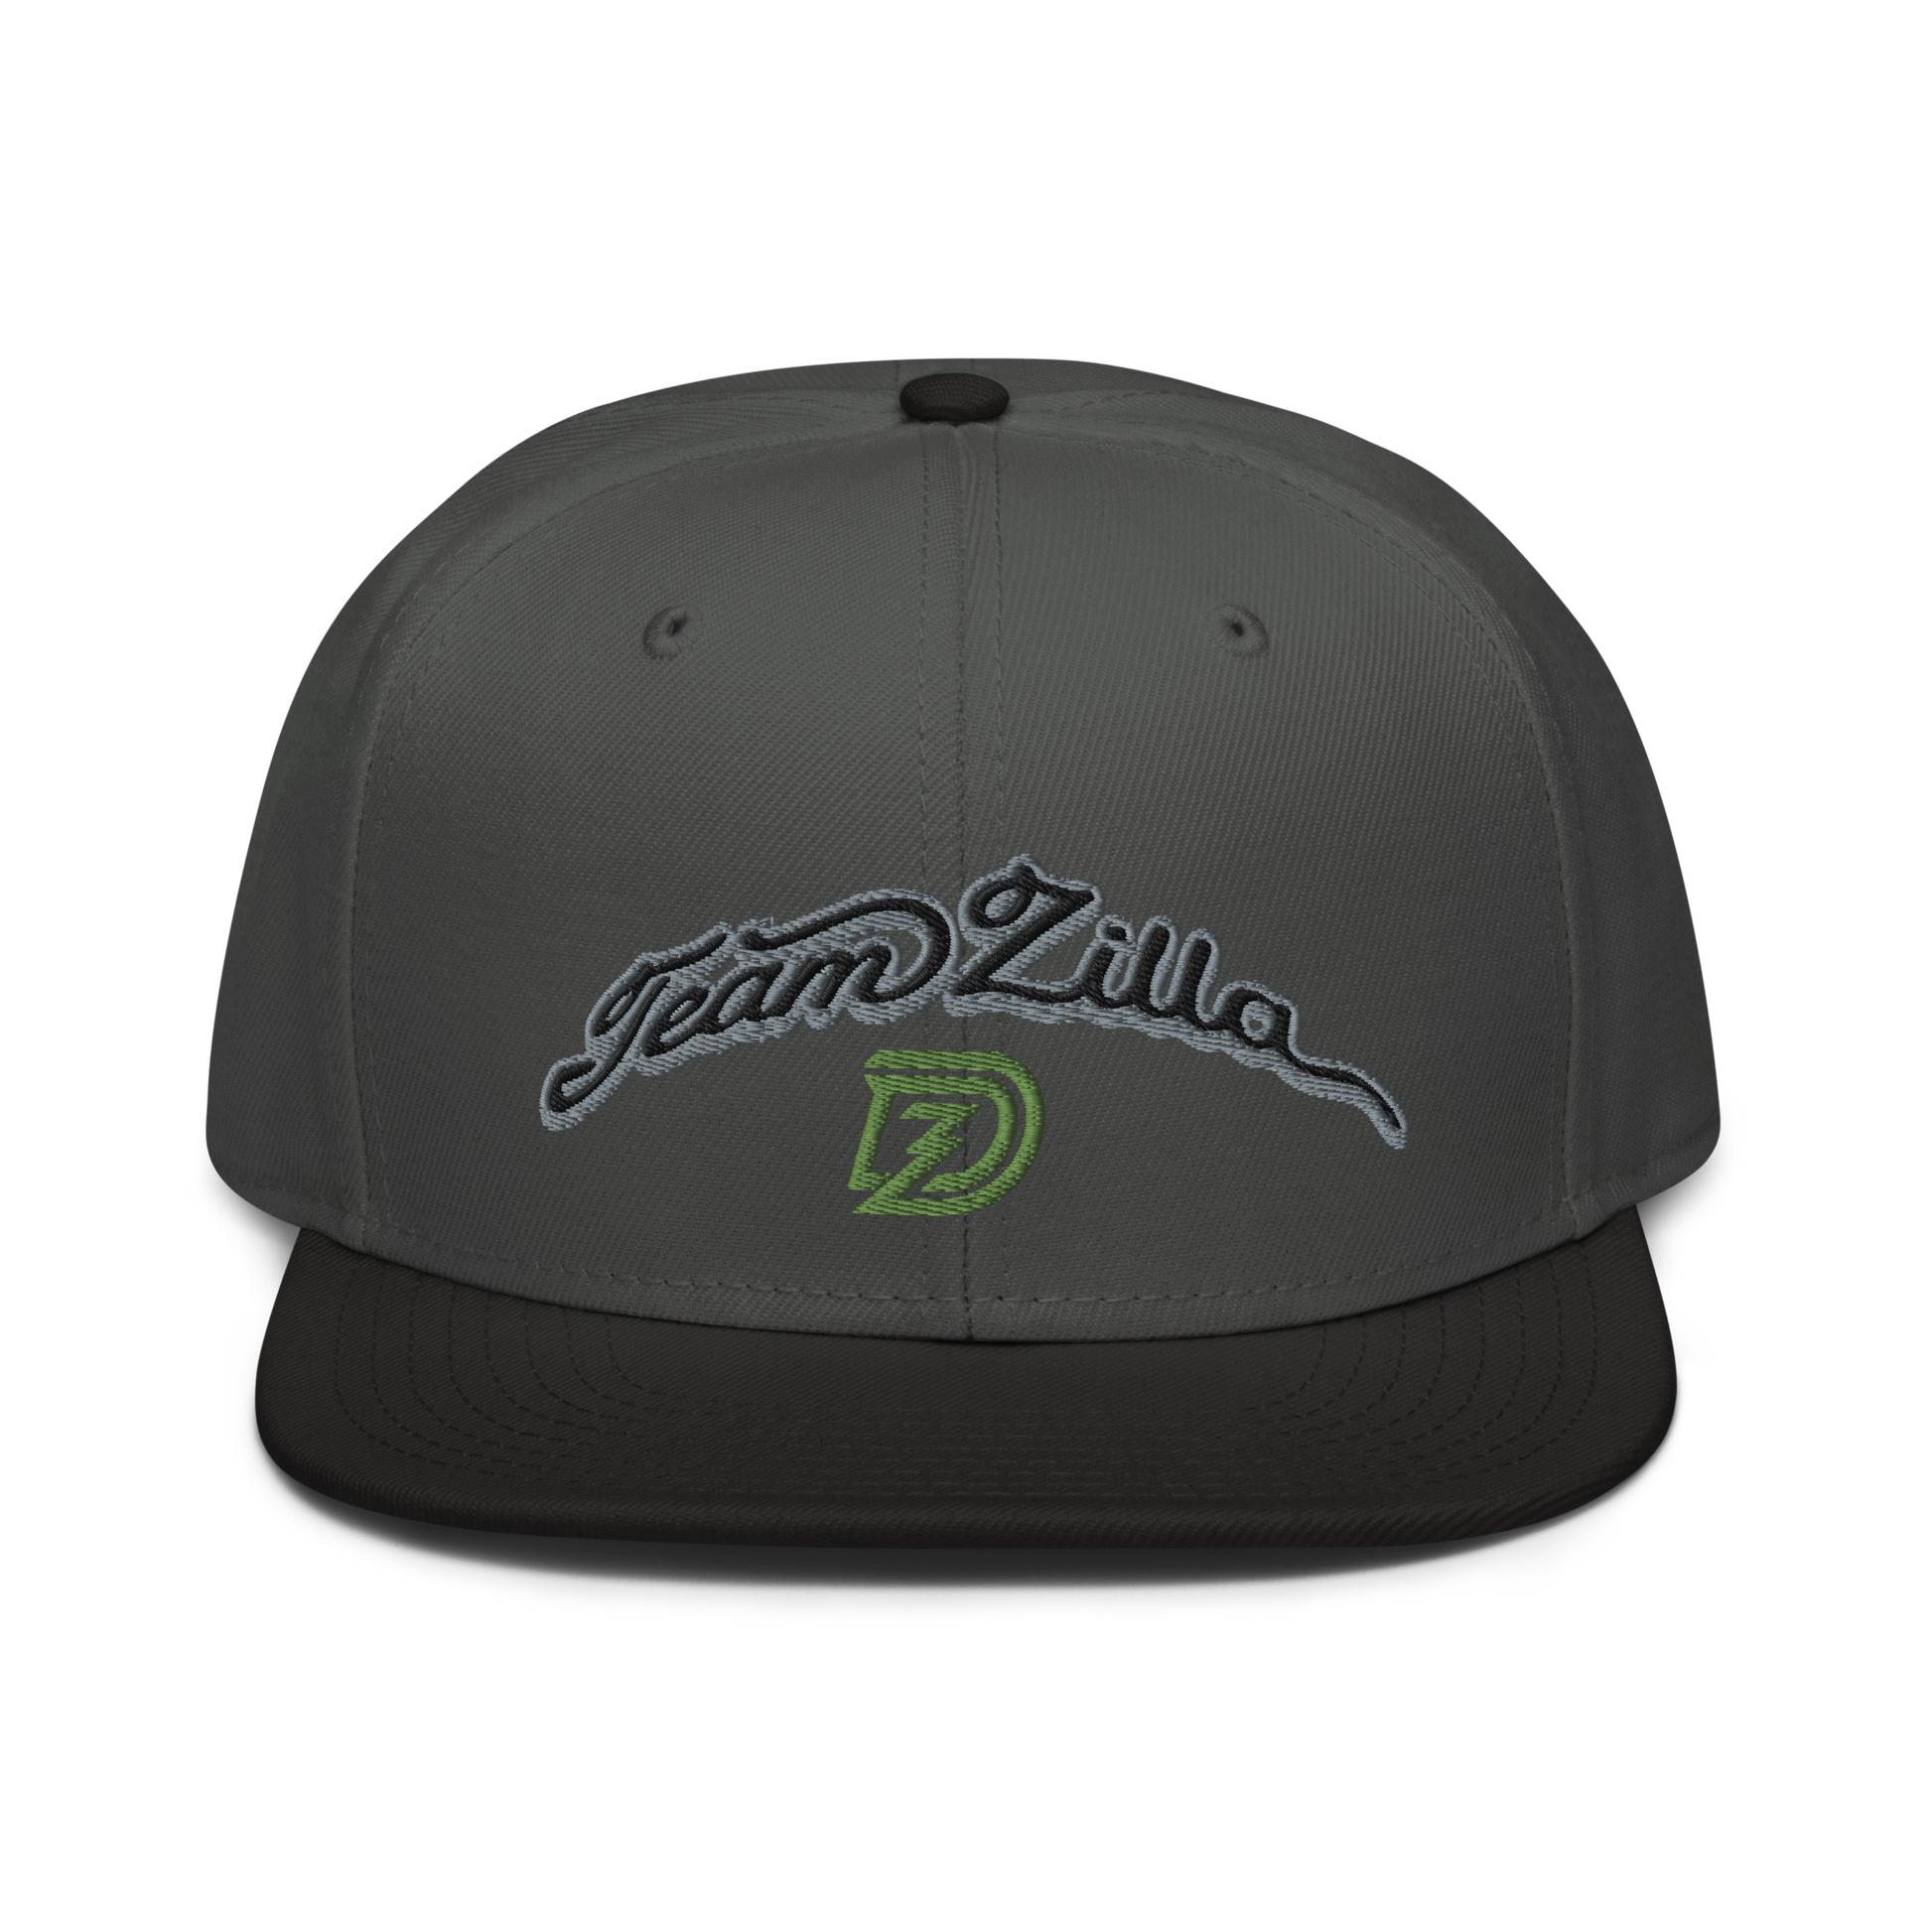 Team Zilla Snapback in Charcoal Gray with Black Brim